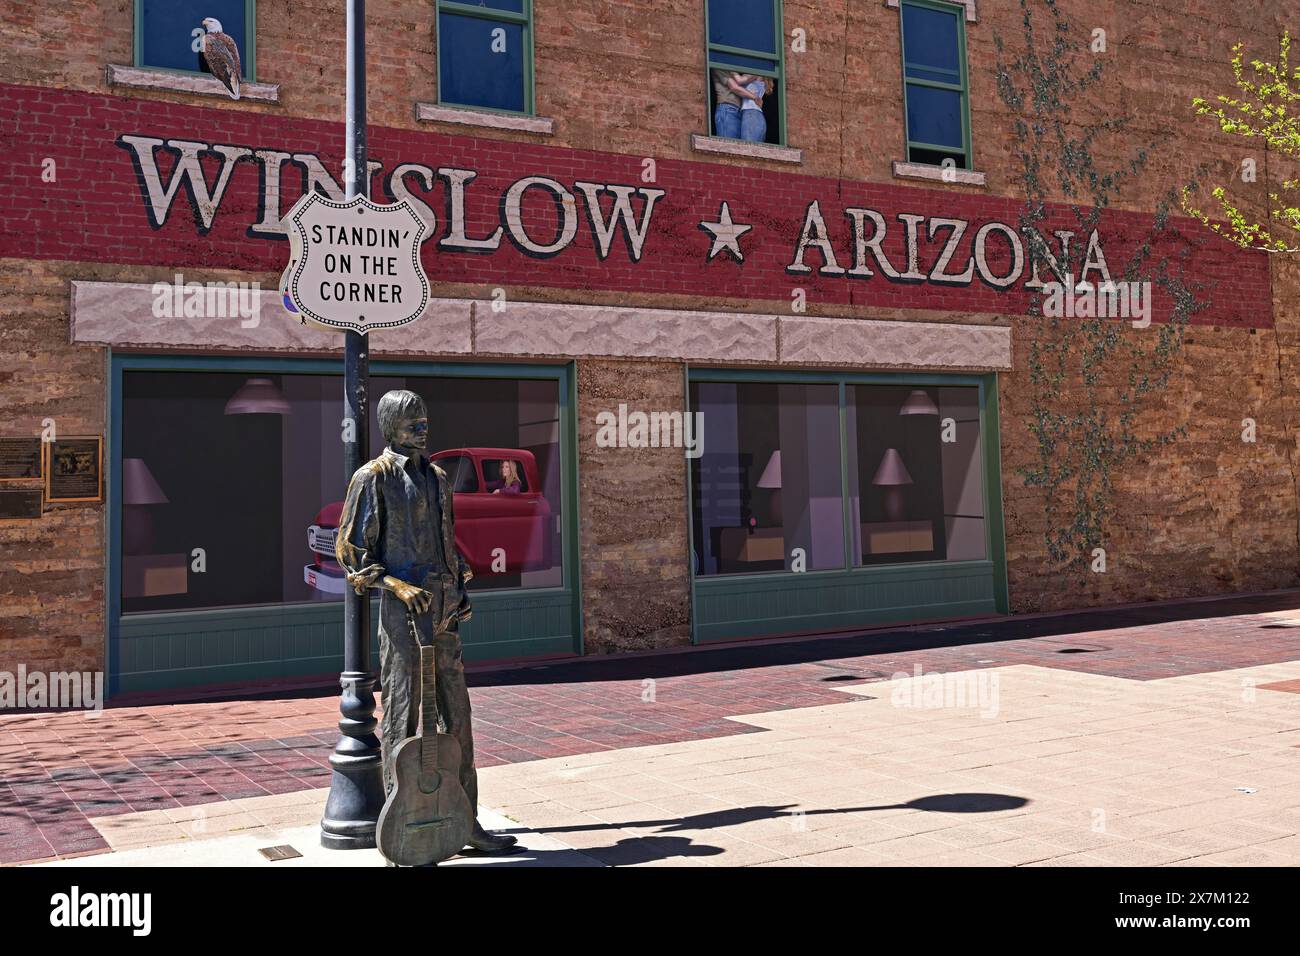 Standin' on the Corner in Winslow, Arizona sung by the rock group Eagles in the song Take it easy, Route 66, Winslow, Arizona Stock Photo